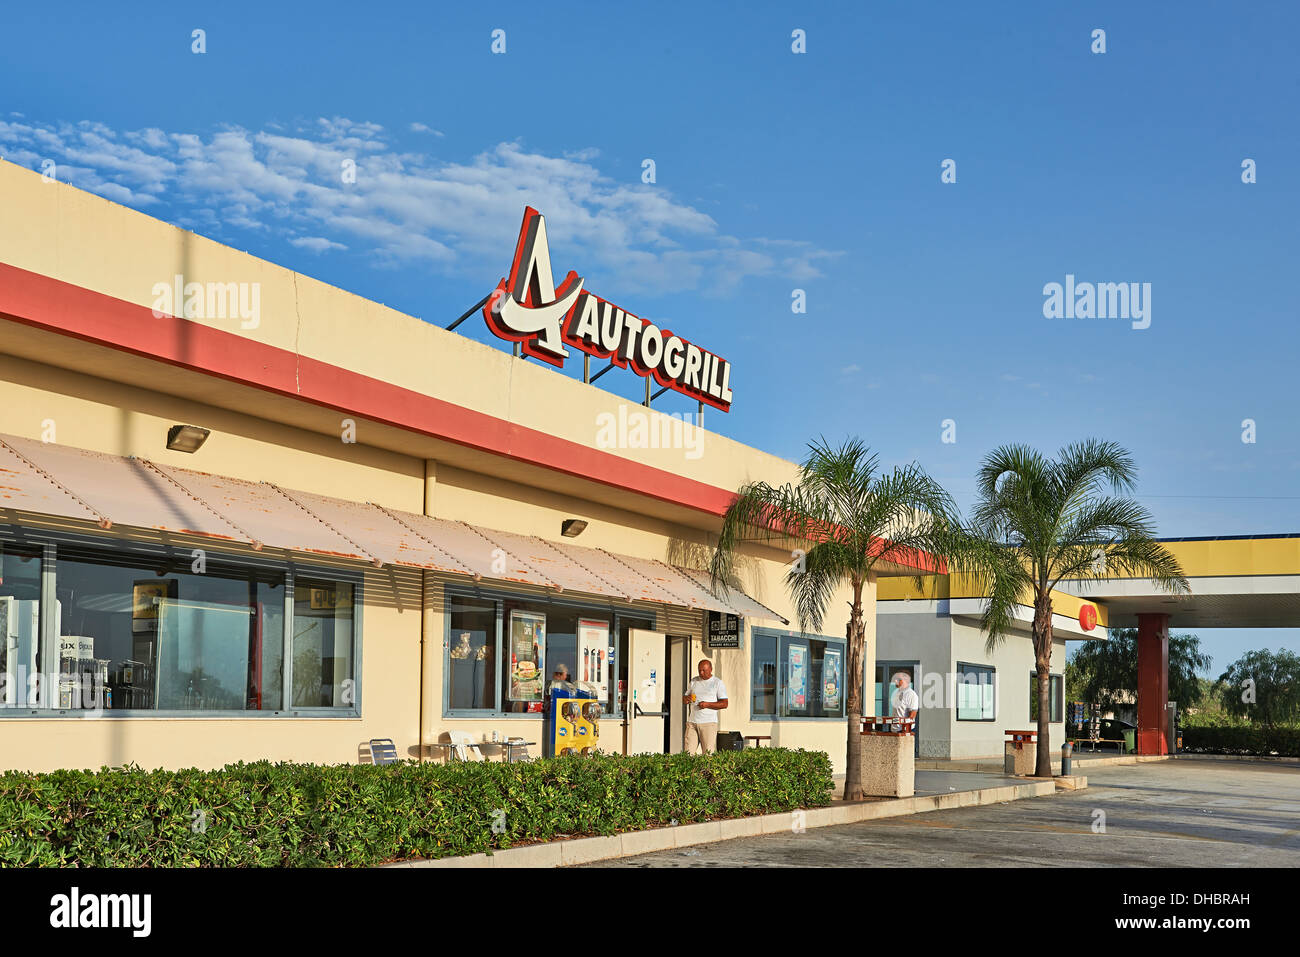 Autogrill Restaurant And Shop In Sicily Stock Photo